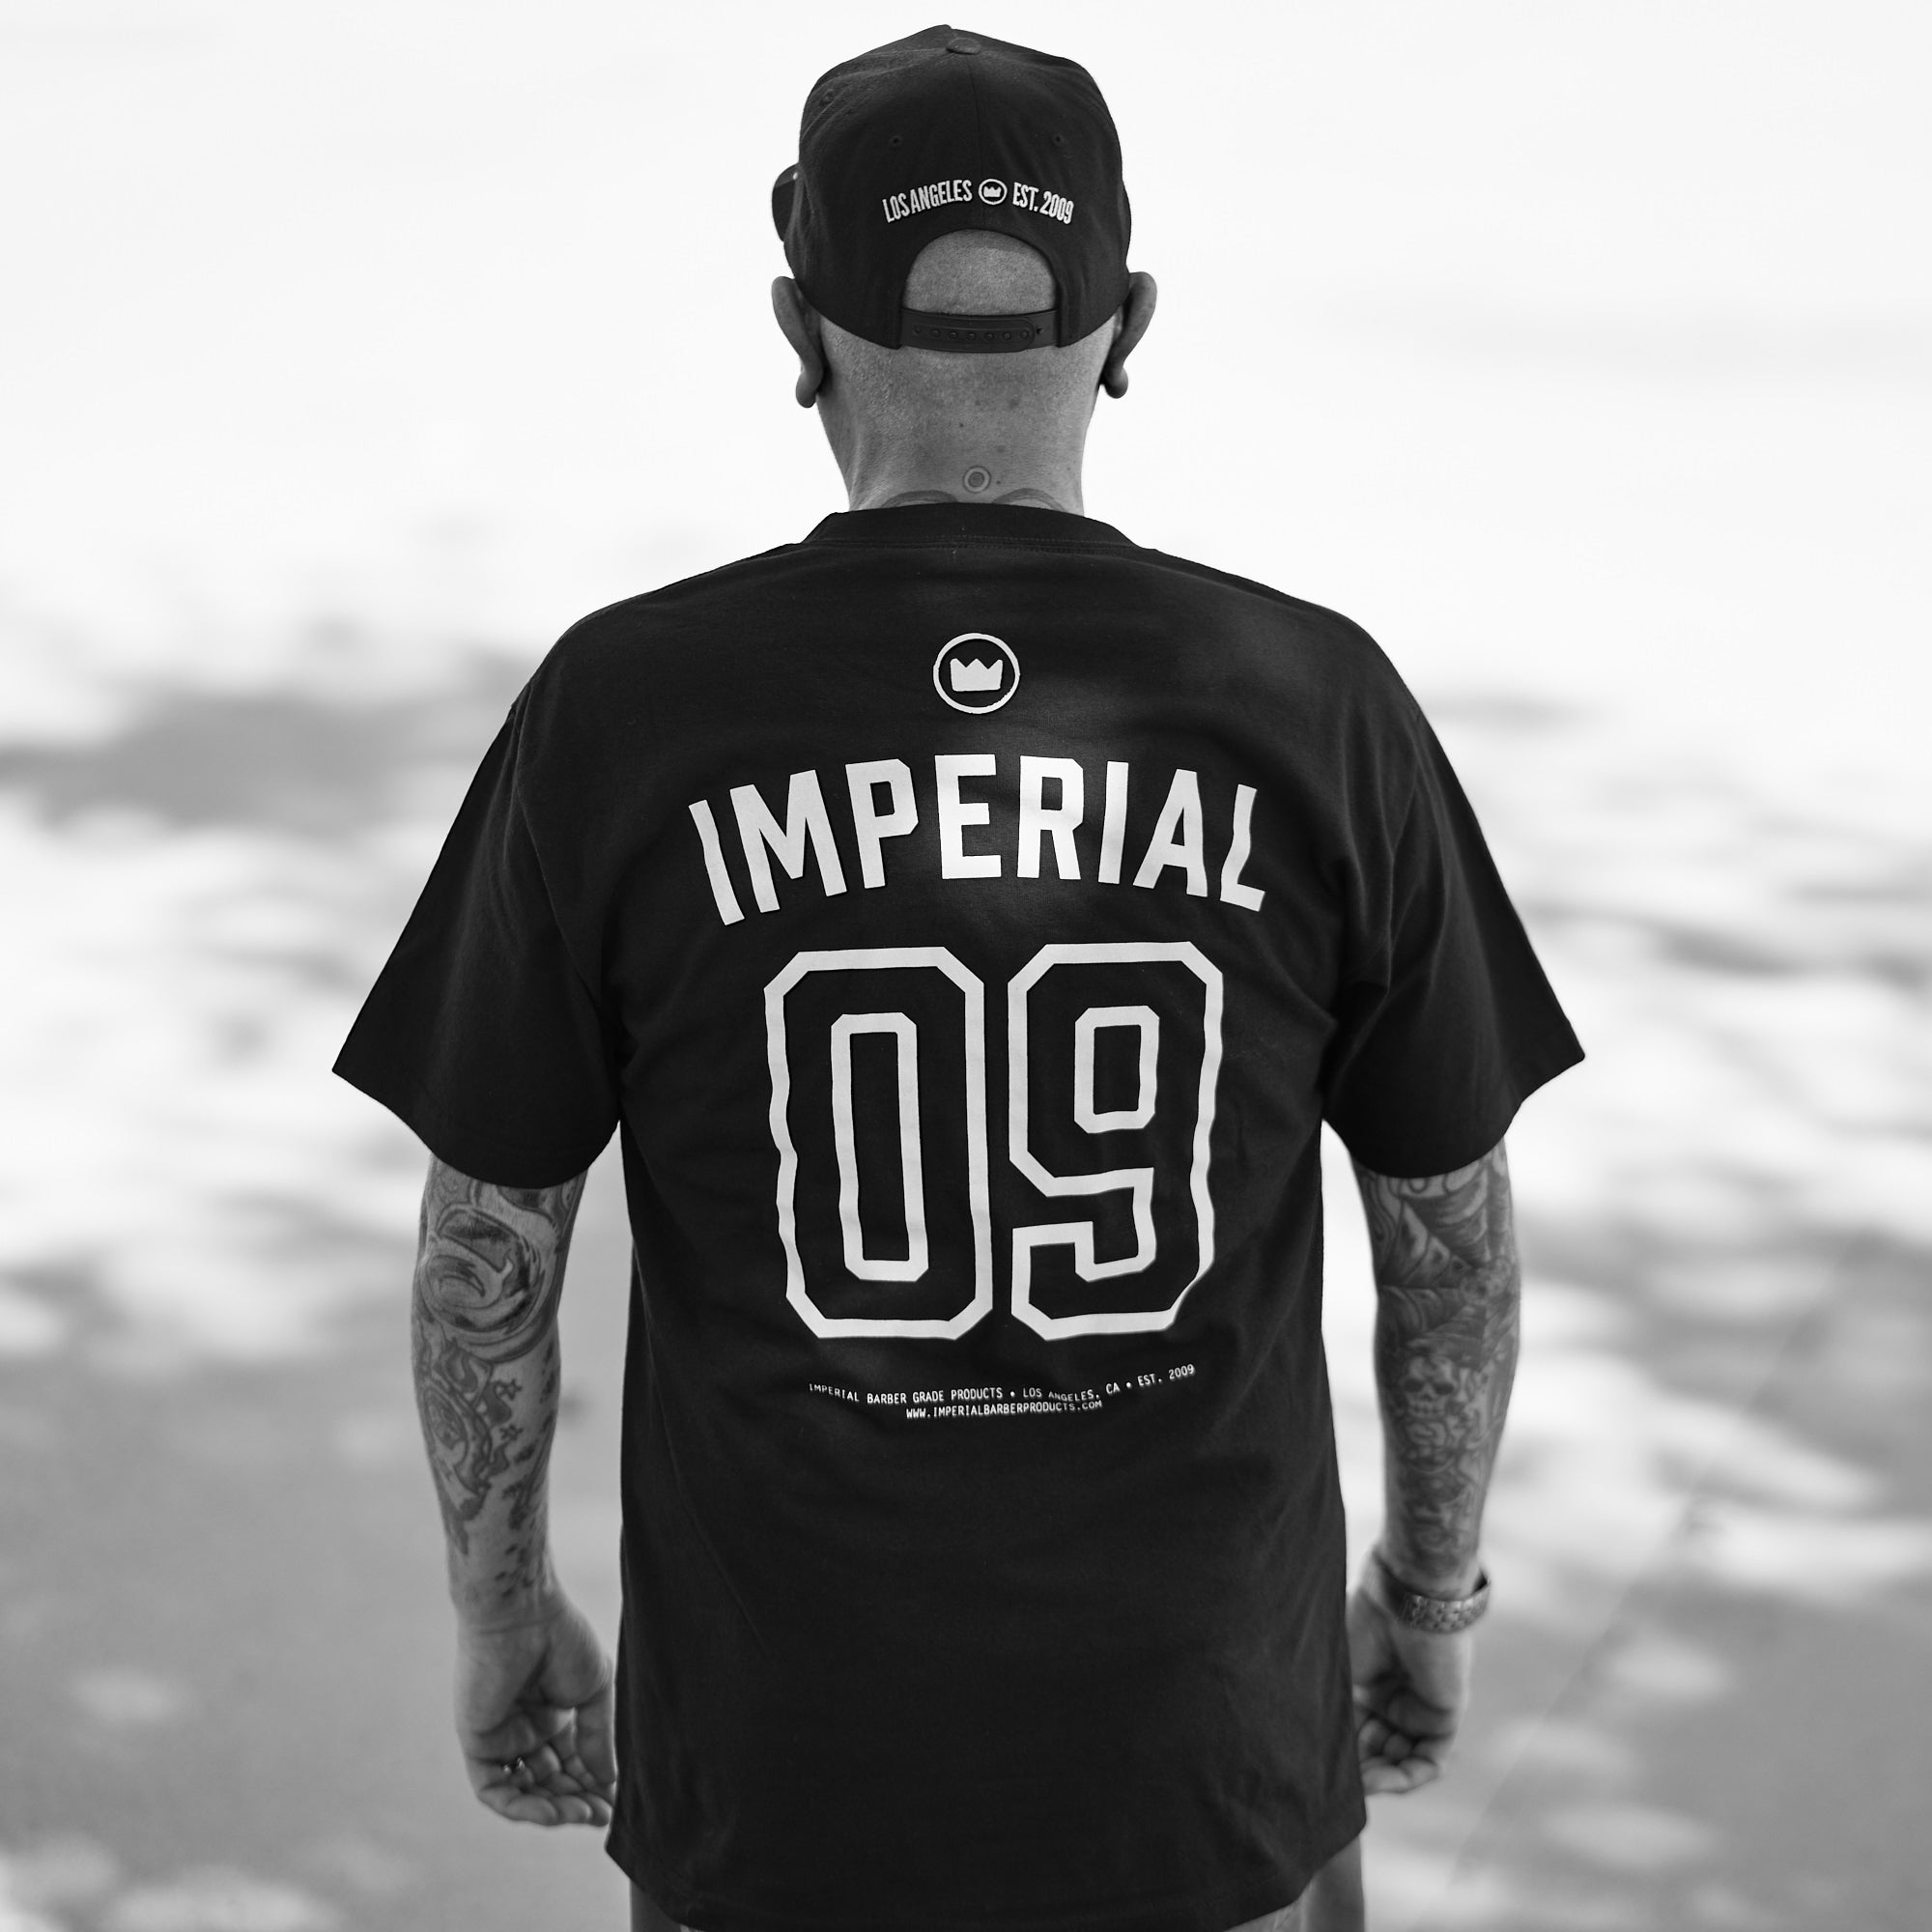 Imperial 09 T-Shirt - Back